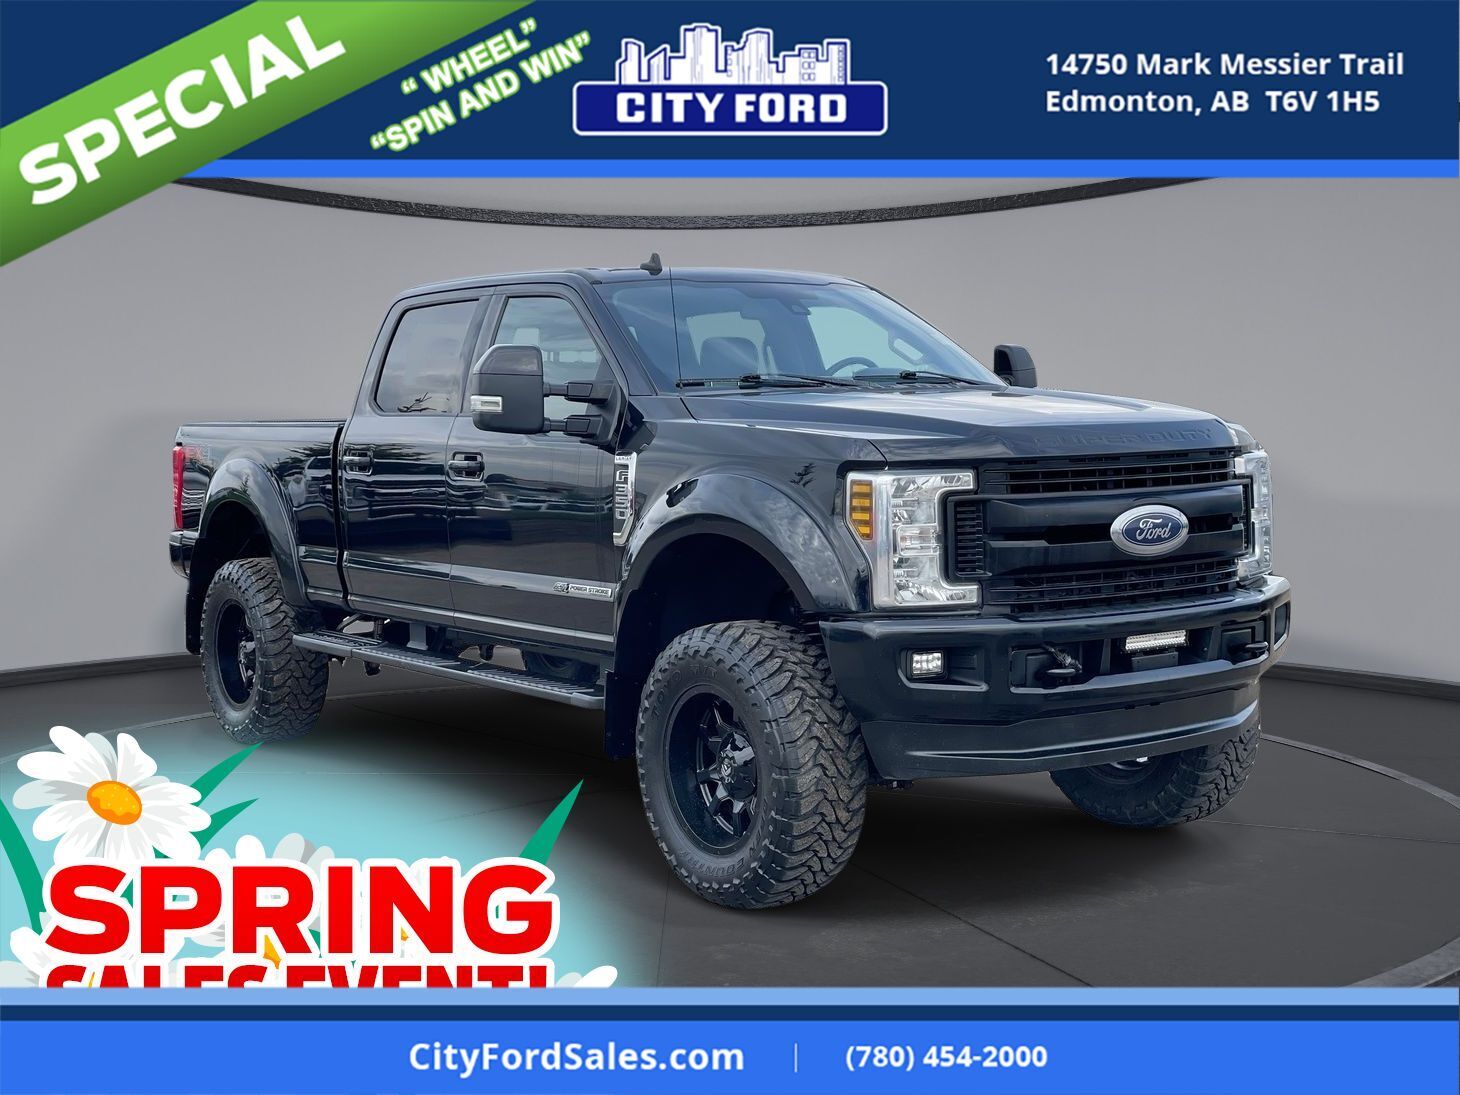 2019 Ford F-350 Lariat 4x4 Crew Cab 6.75' Box | FULLY INSPECTED